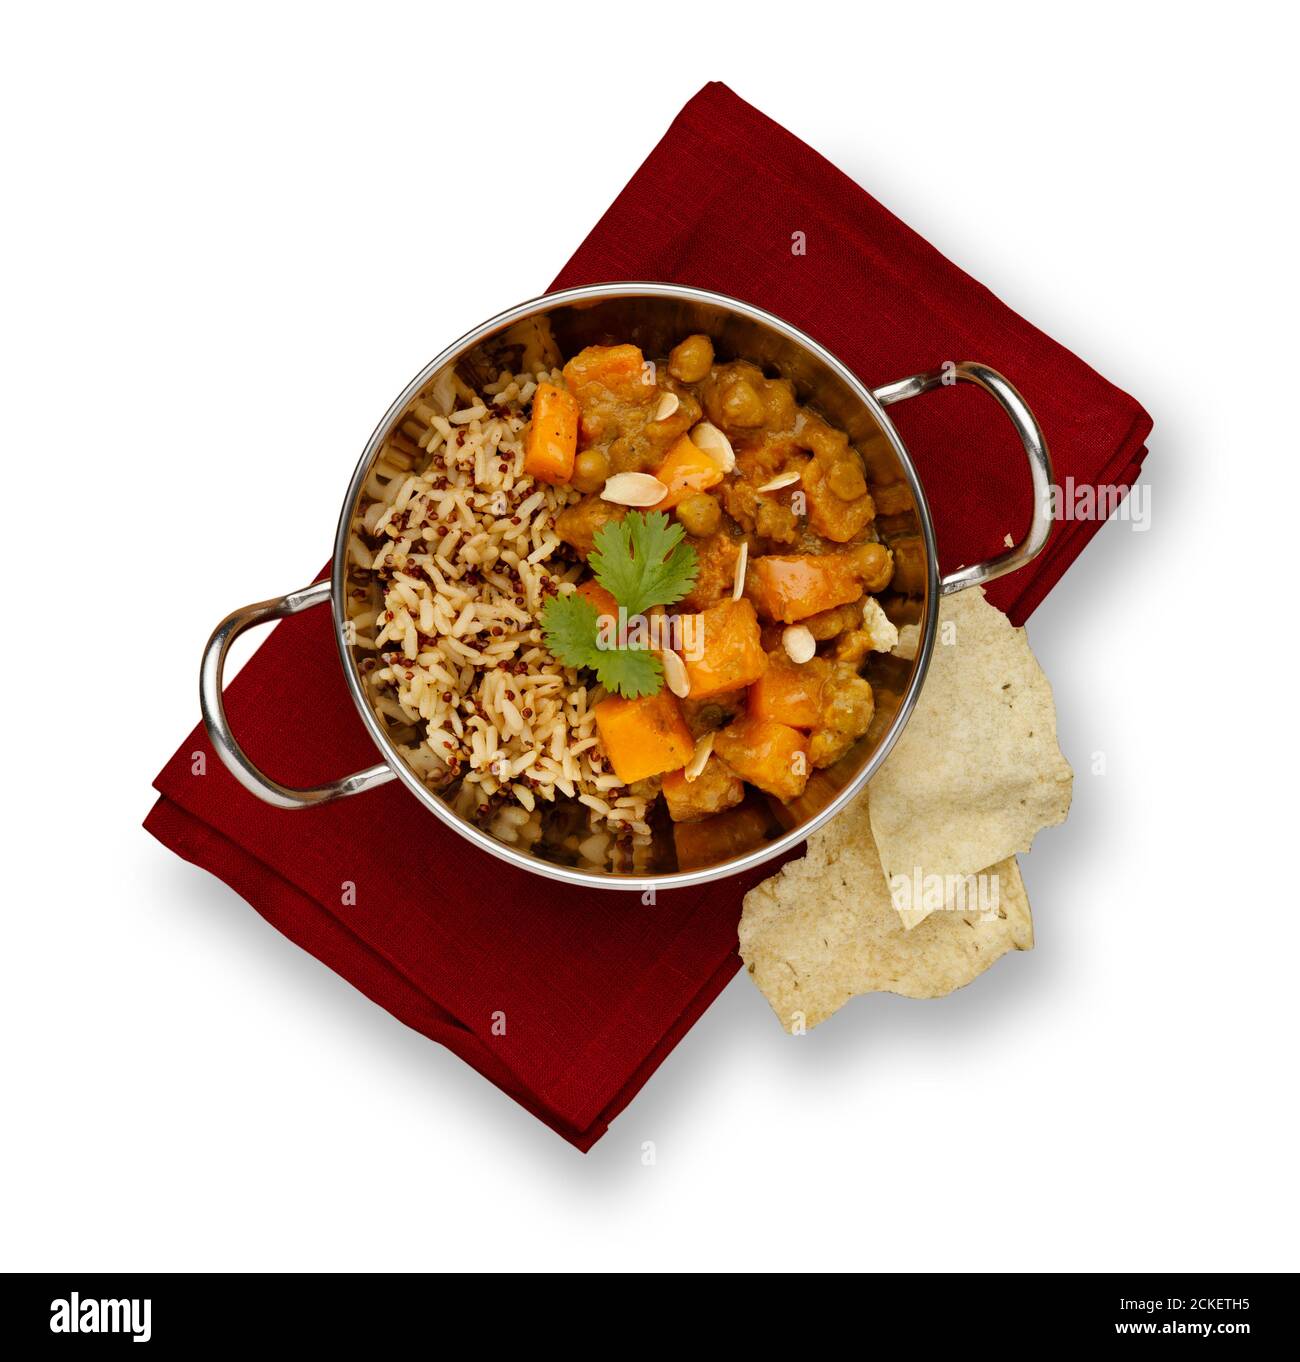 A traditional blati dish filled with delicious vegetable chicken curry and rustic rice, garnished with a sprig of corriander, on a red napkin and popa Stock Photo